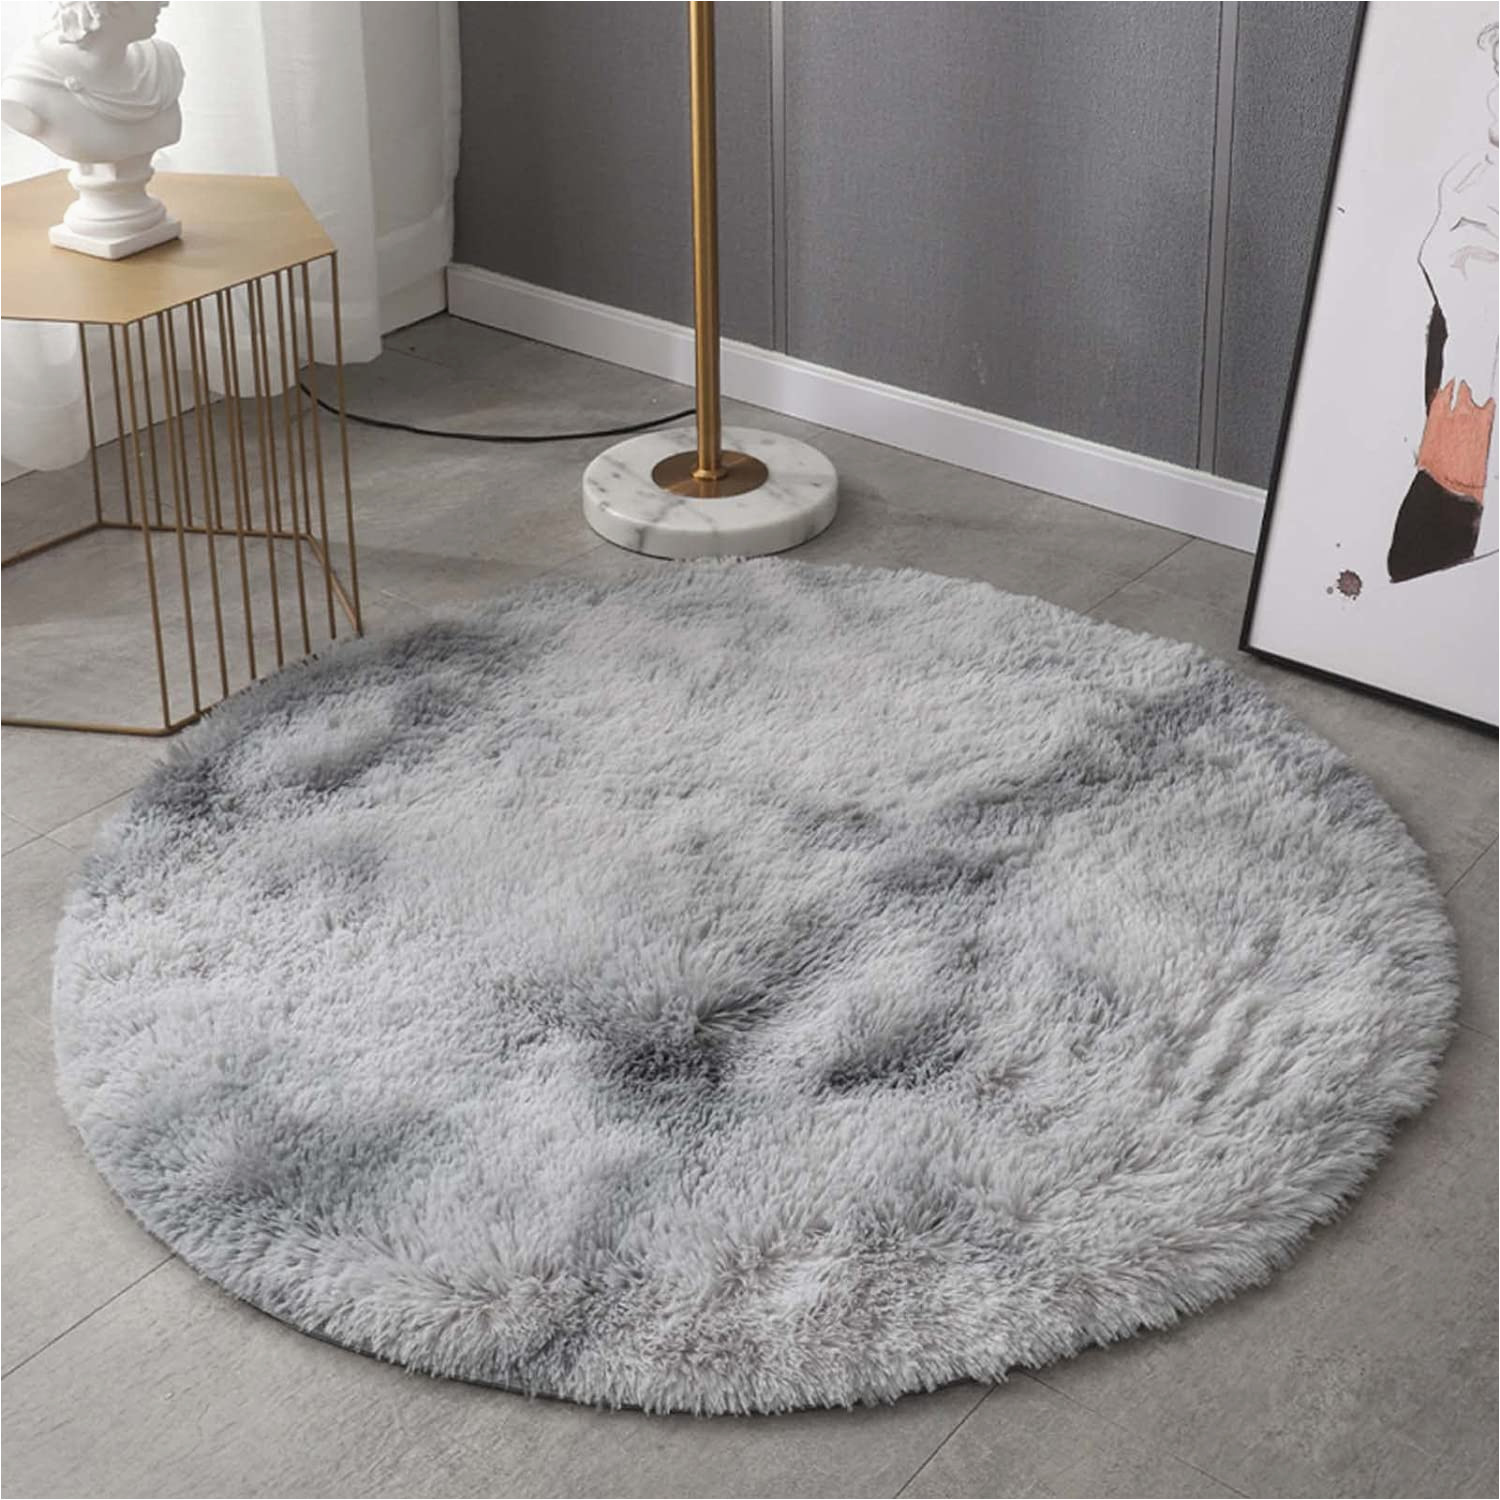 Extra Large Round area Rugs Round High Pile Rugs, 120 Cm, soft and Comfortable Living Room Rug …